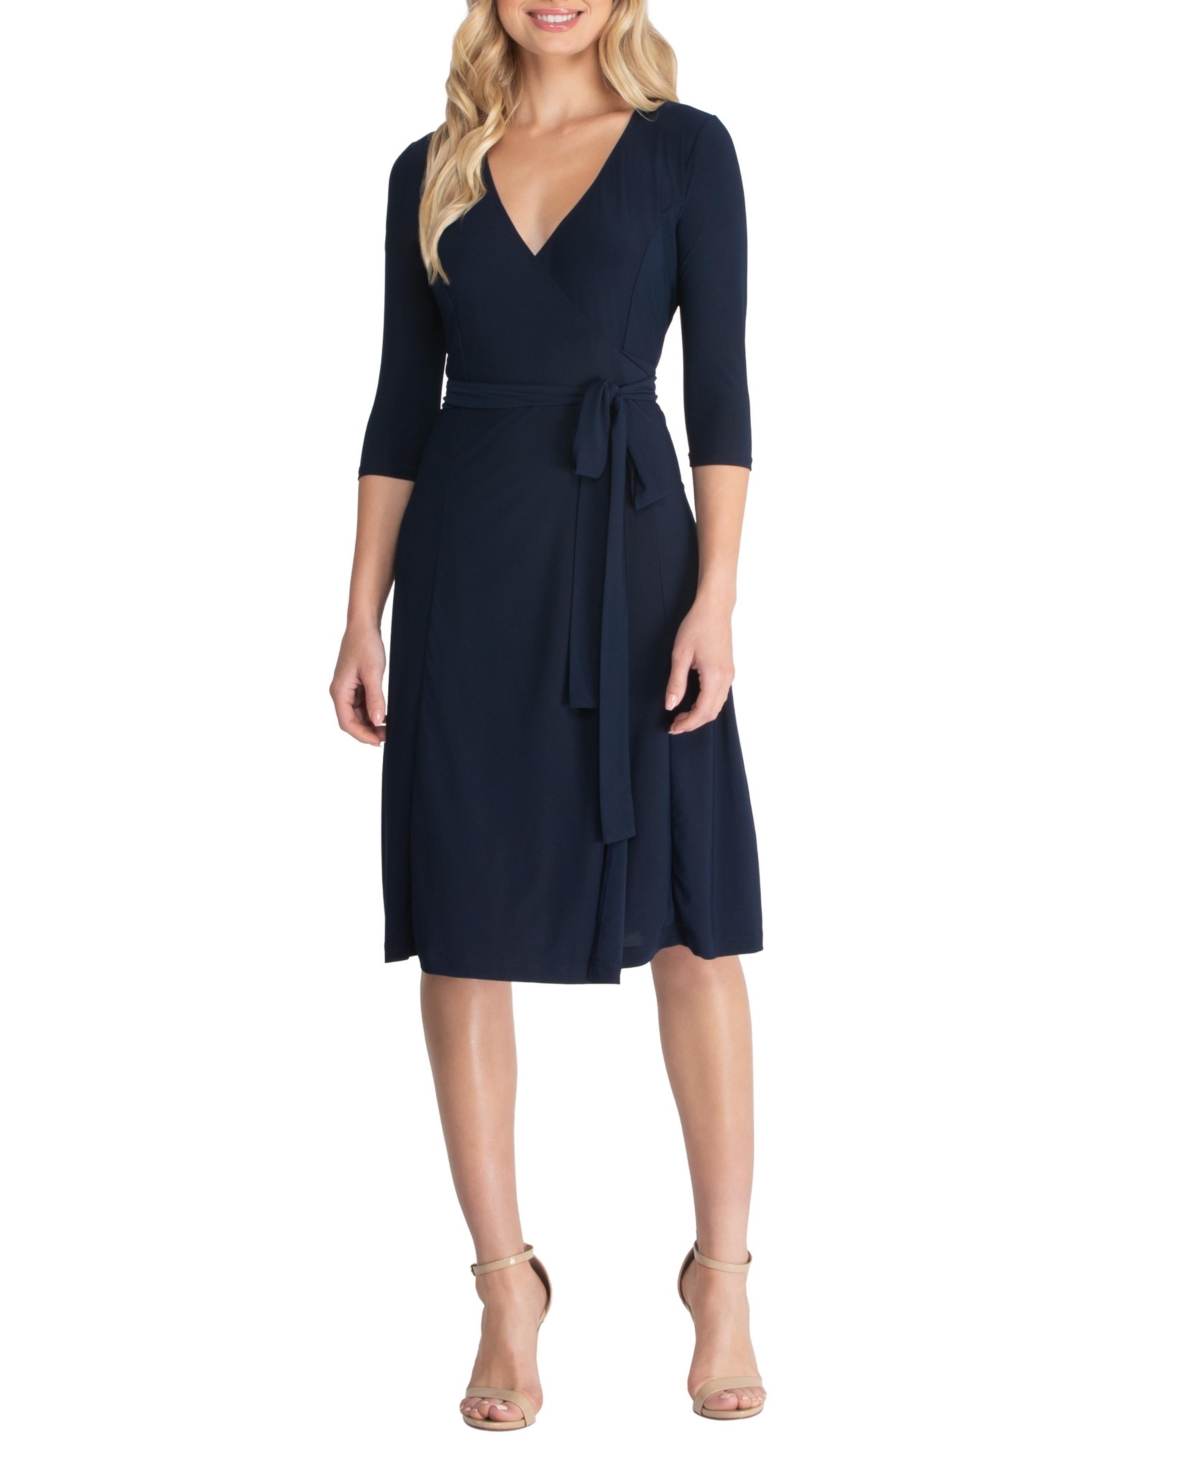 Women's Essential Wrap Dress with 3/4 Sleeves - Nouveau navy